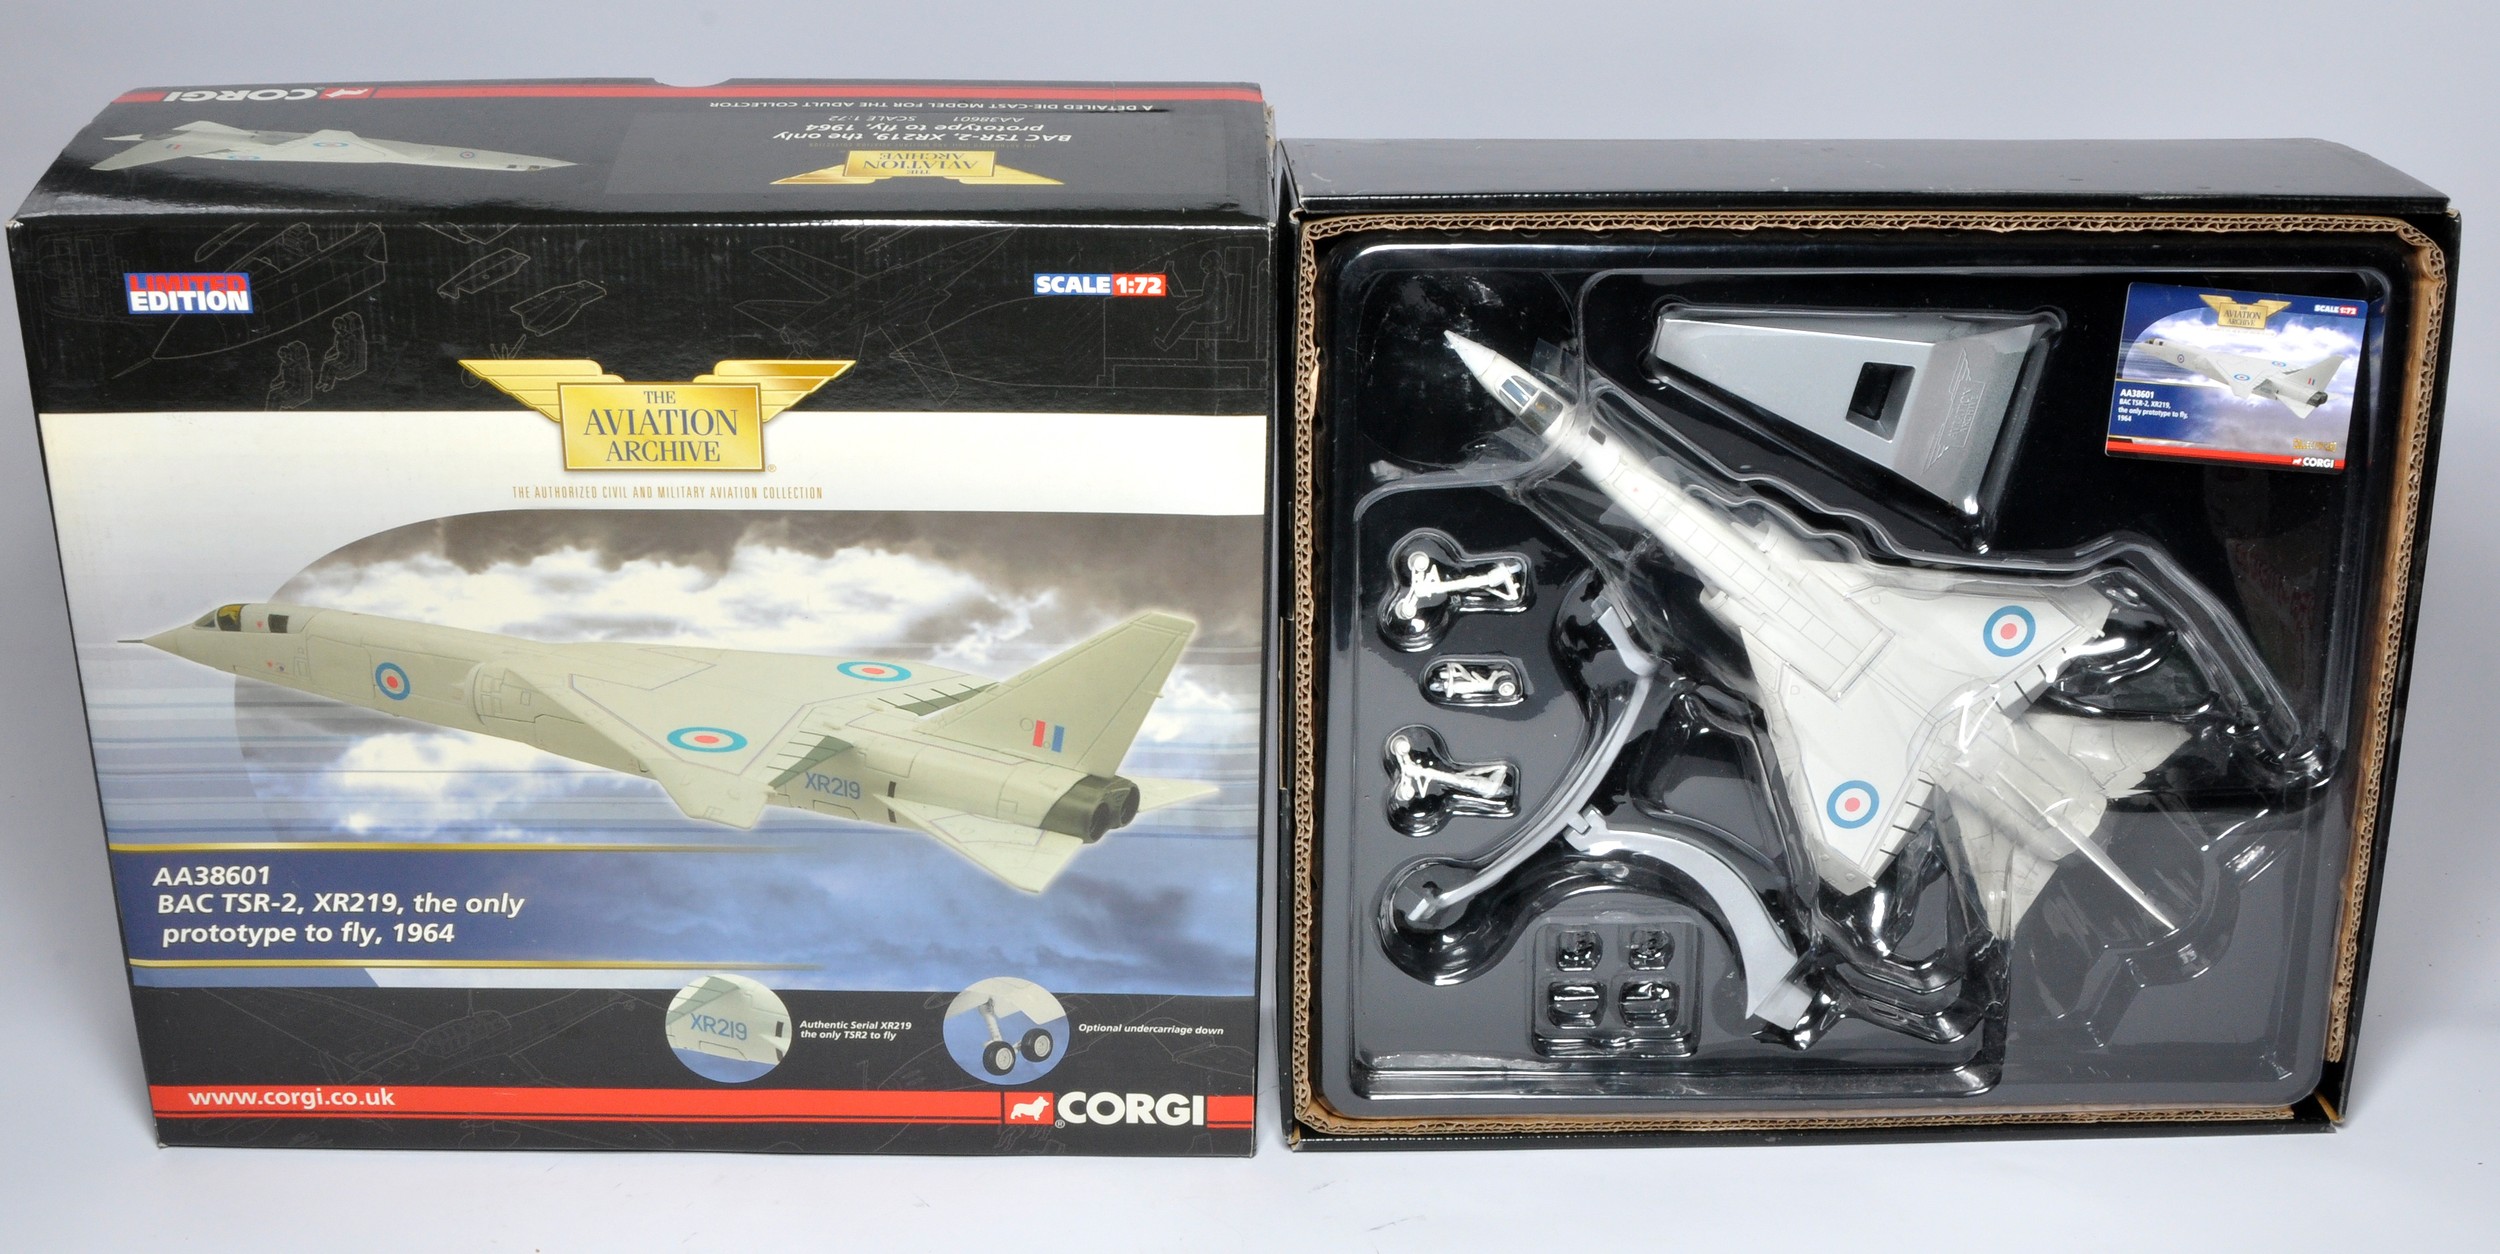 Corgi 1/72 Diecast Model Aircraft Issue comprising No. AA38601 BAC TSR-2 XR219. Possibly displayed